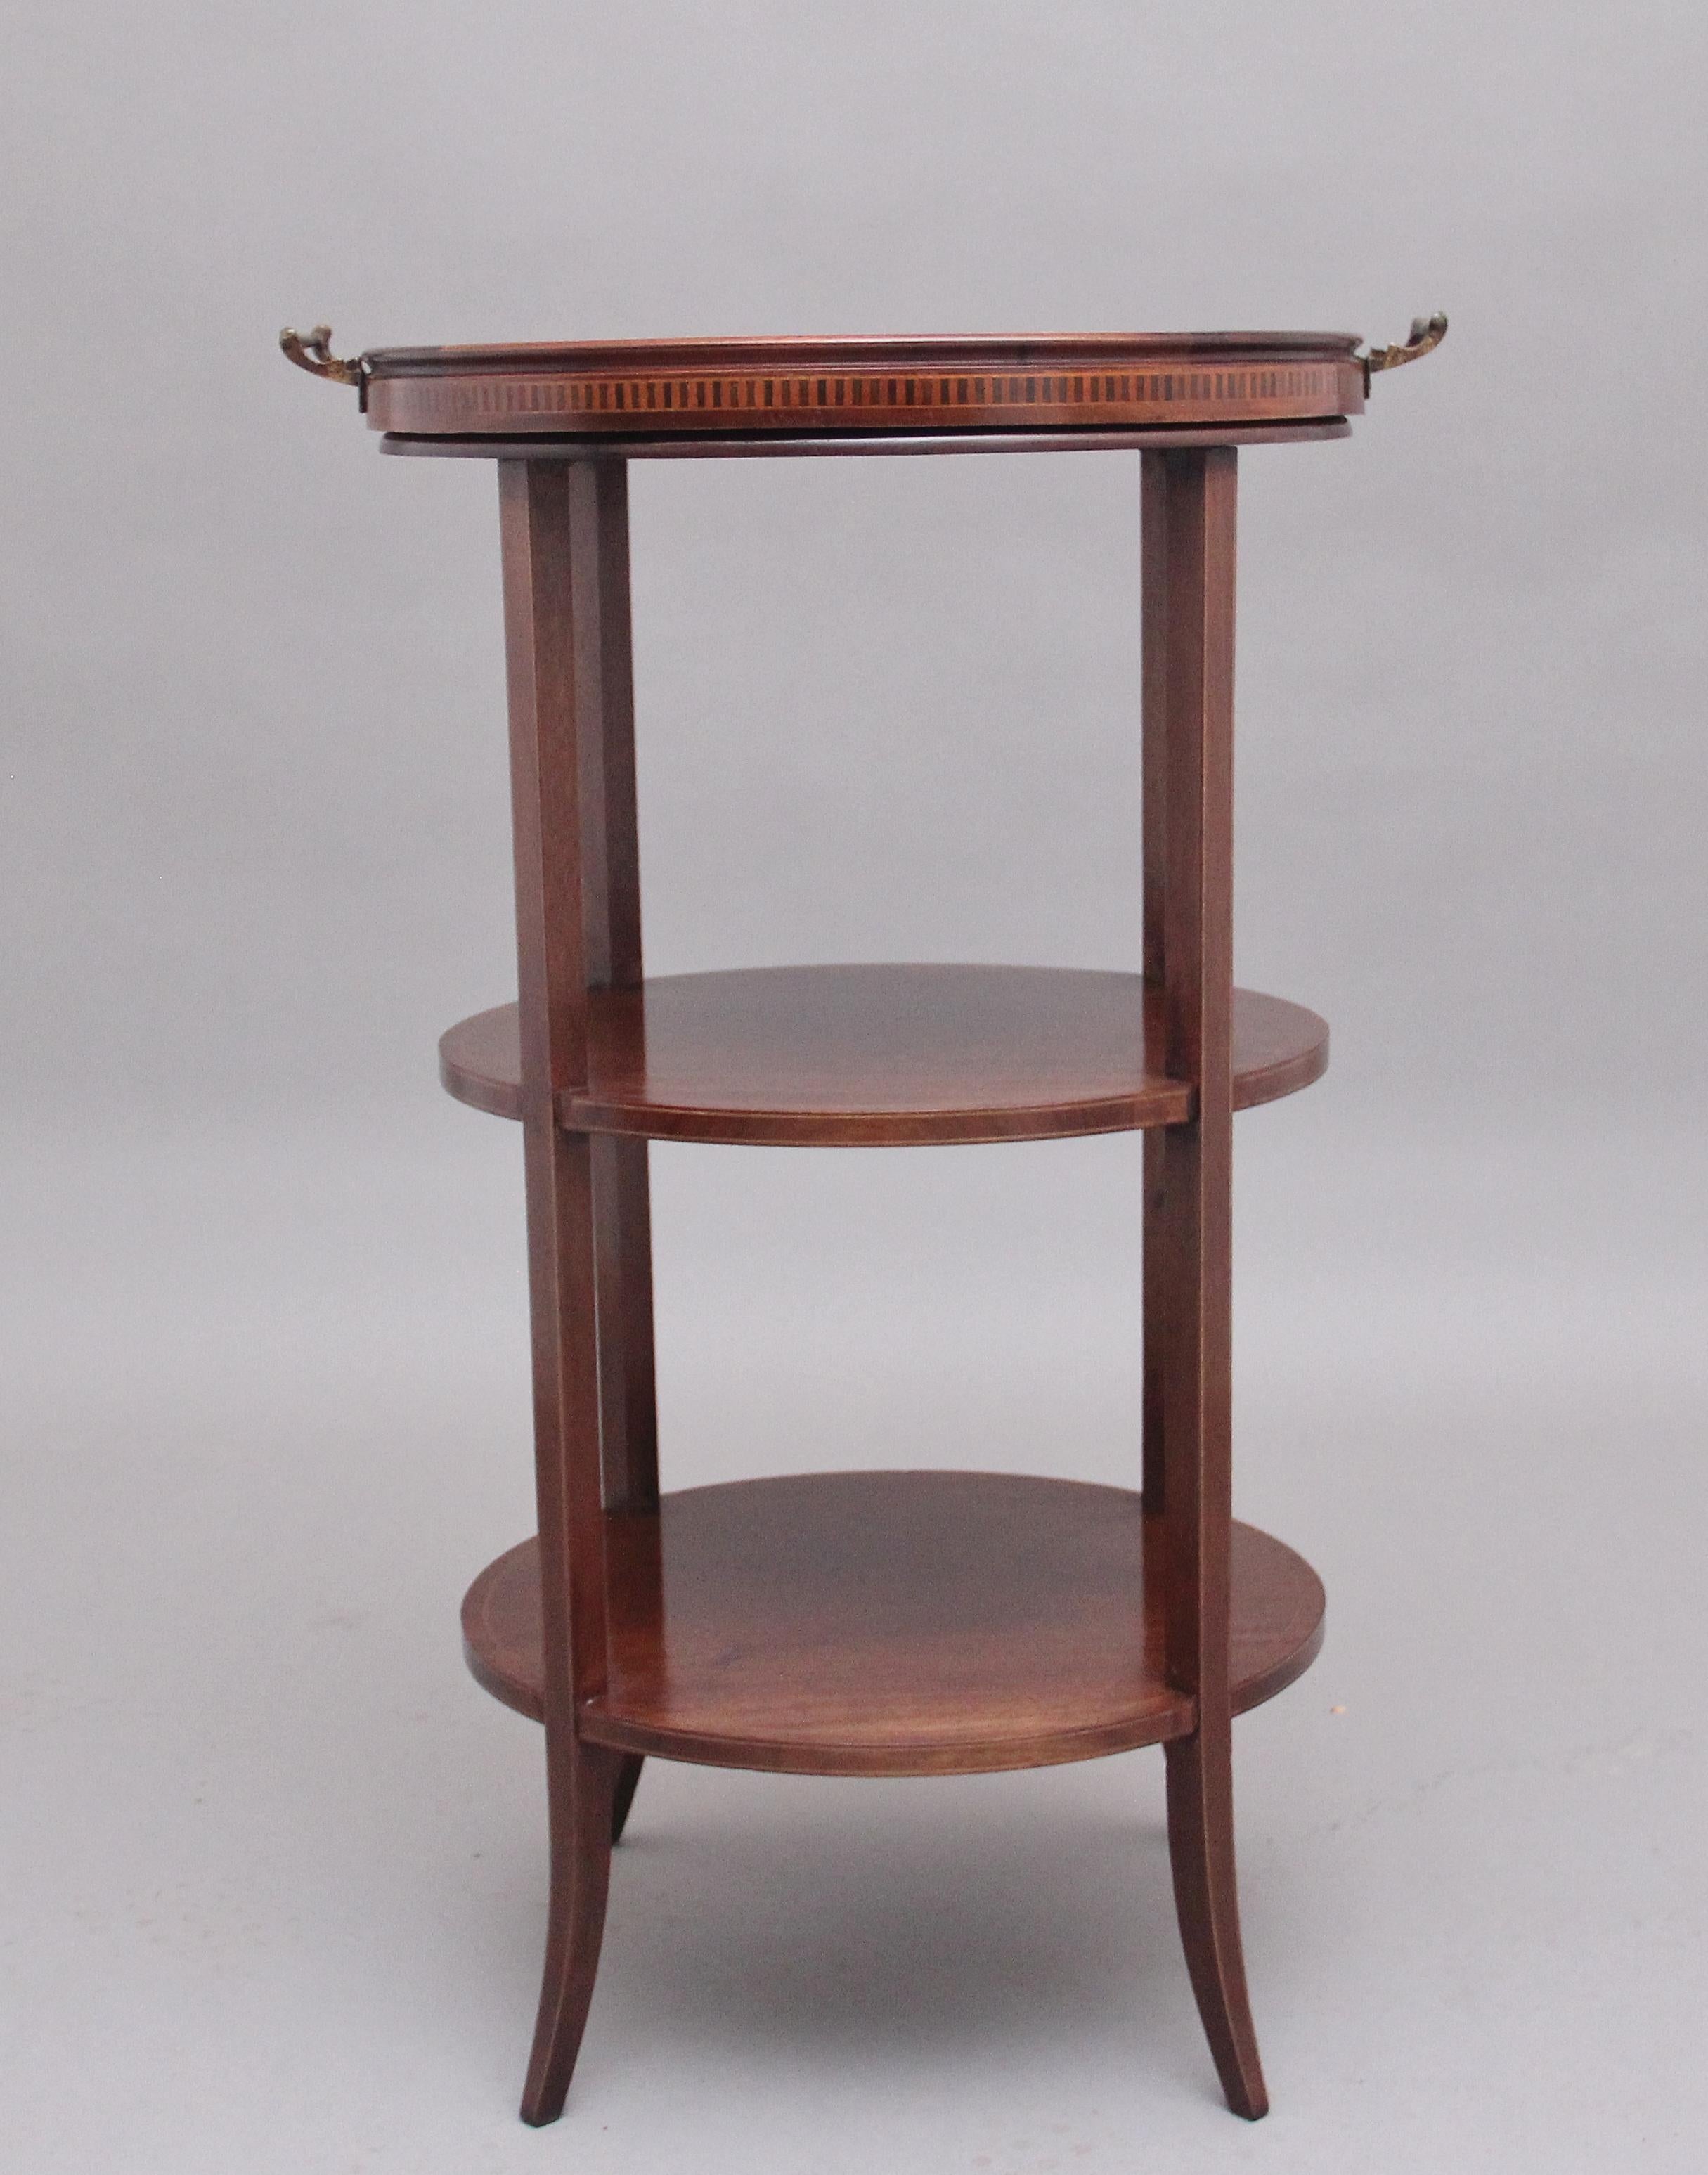 Early 20th century mahogany three tier tray top occasional table, the inlaid top tier having a removable glass tray, three circular tiers raised on square supports. Circa 1900.
 